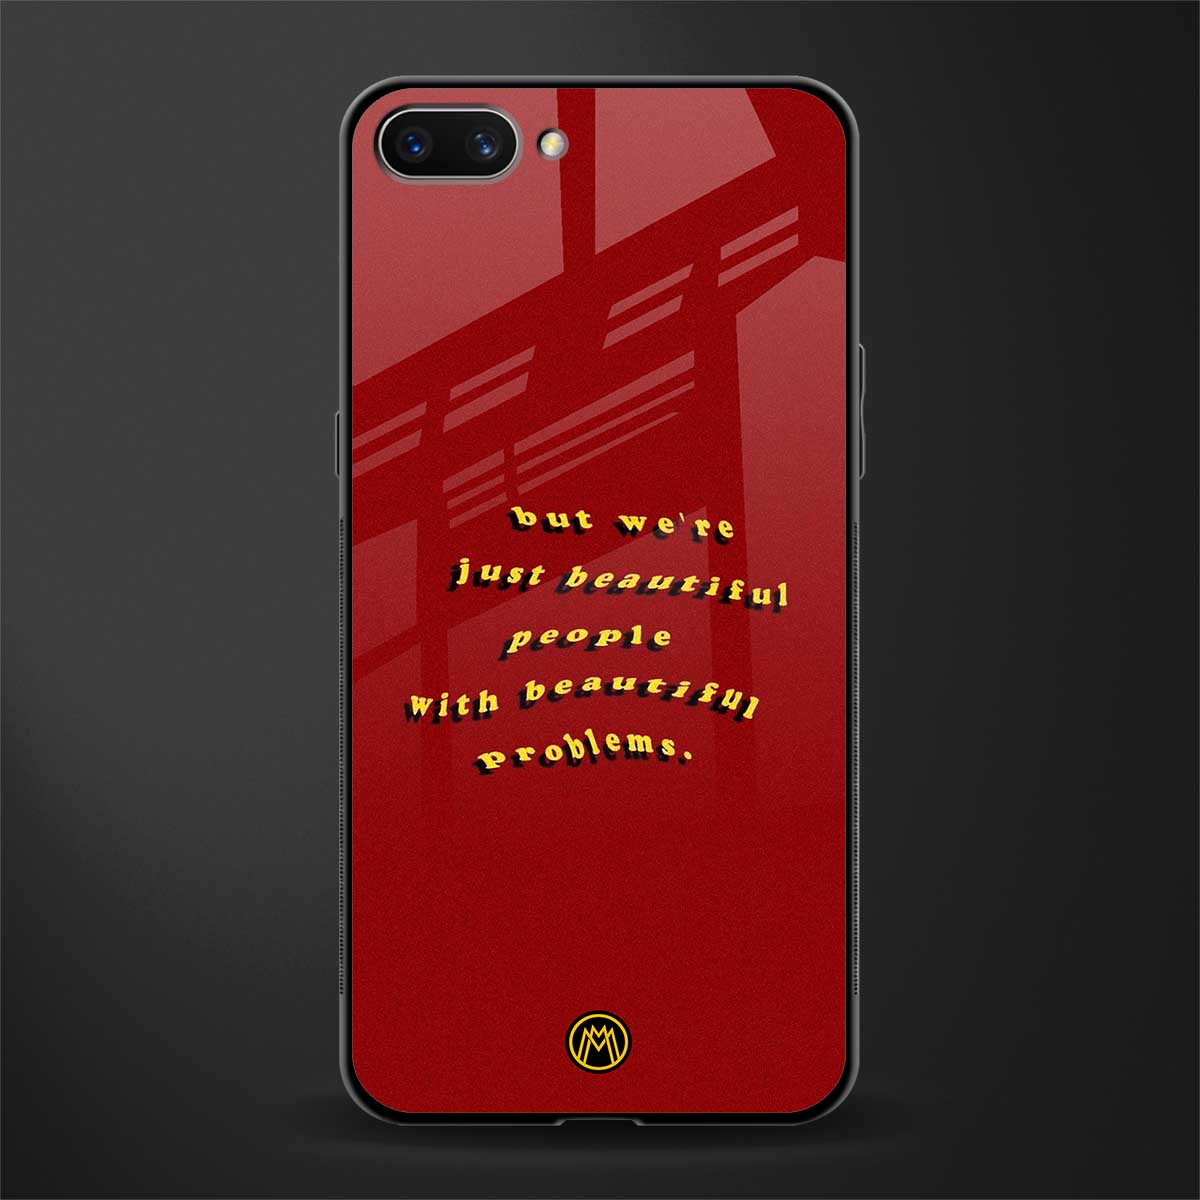 beautiful people with beautiful problems glass case for realme c1 image